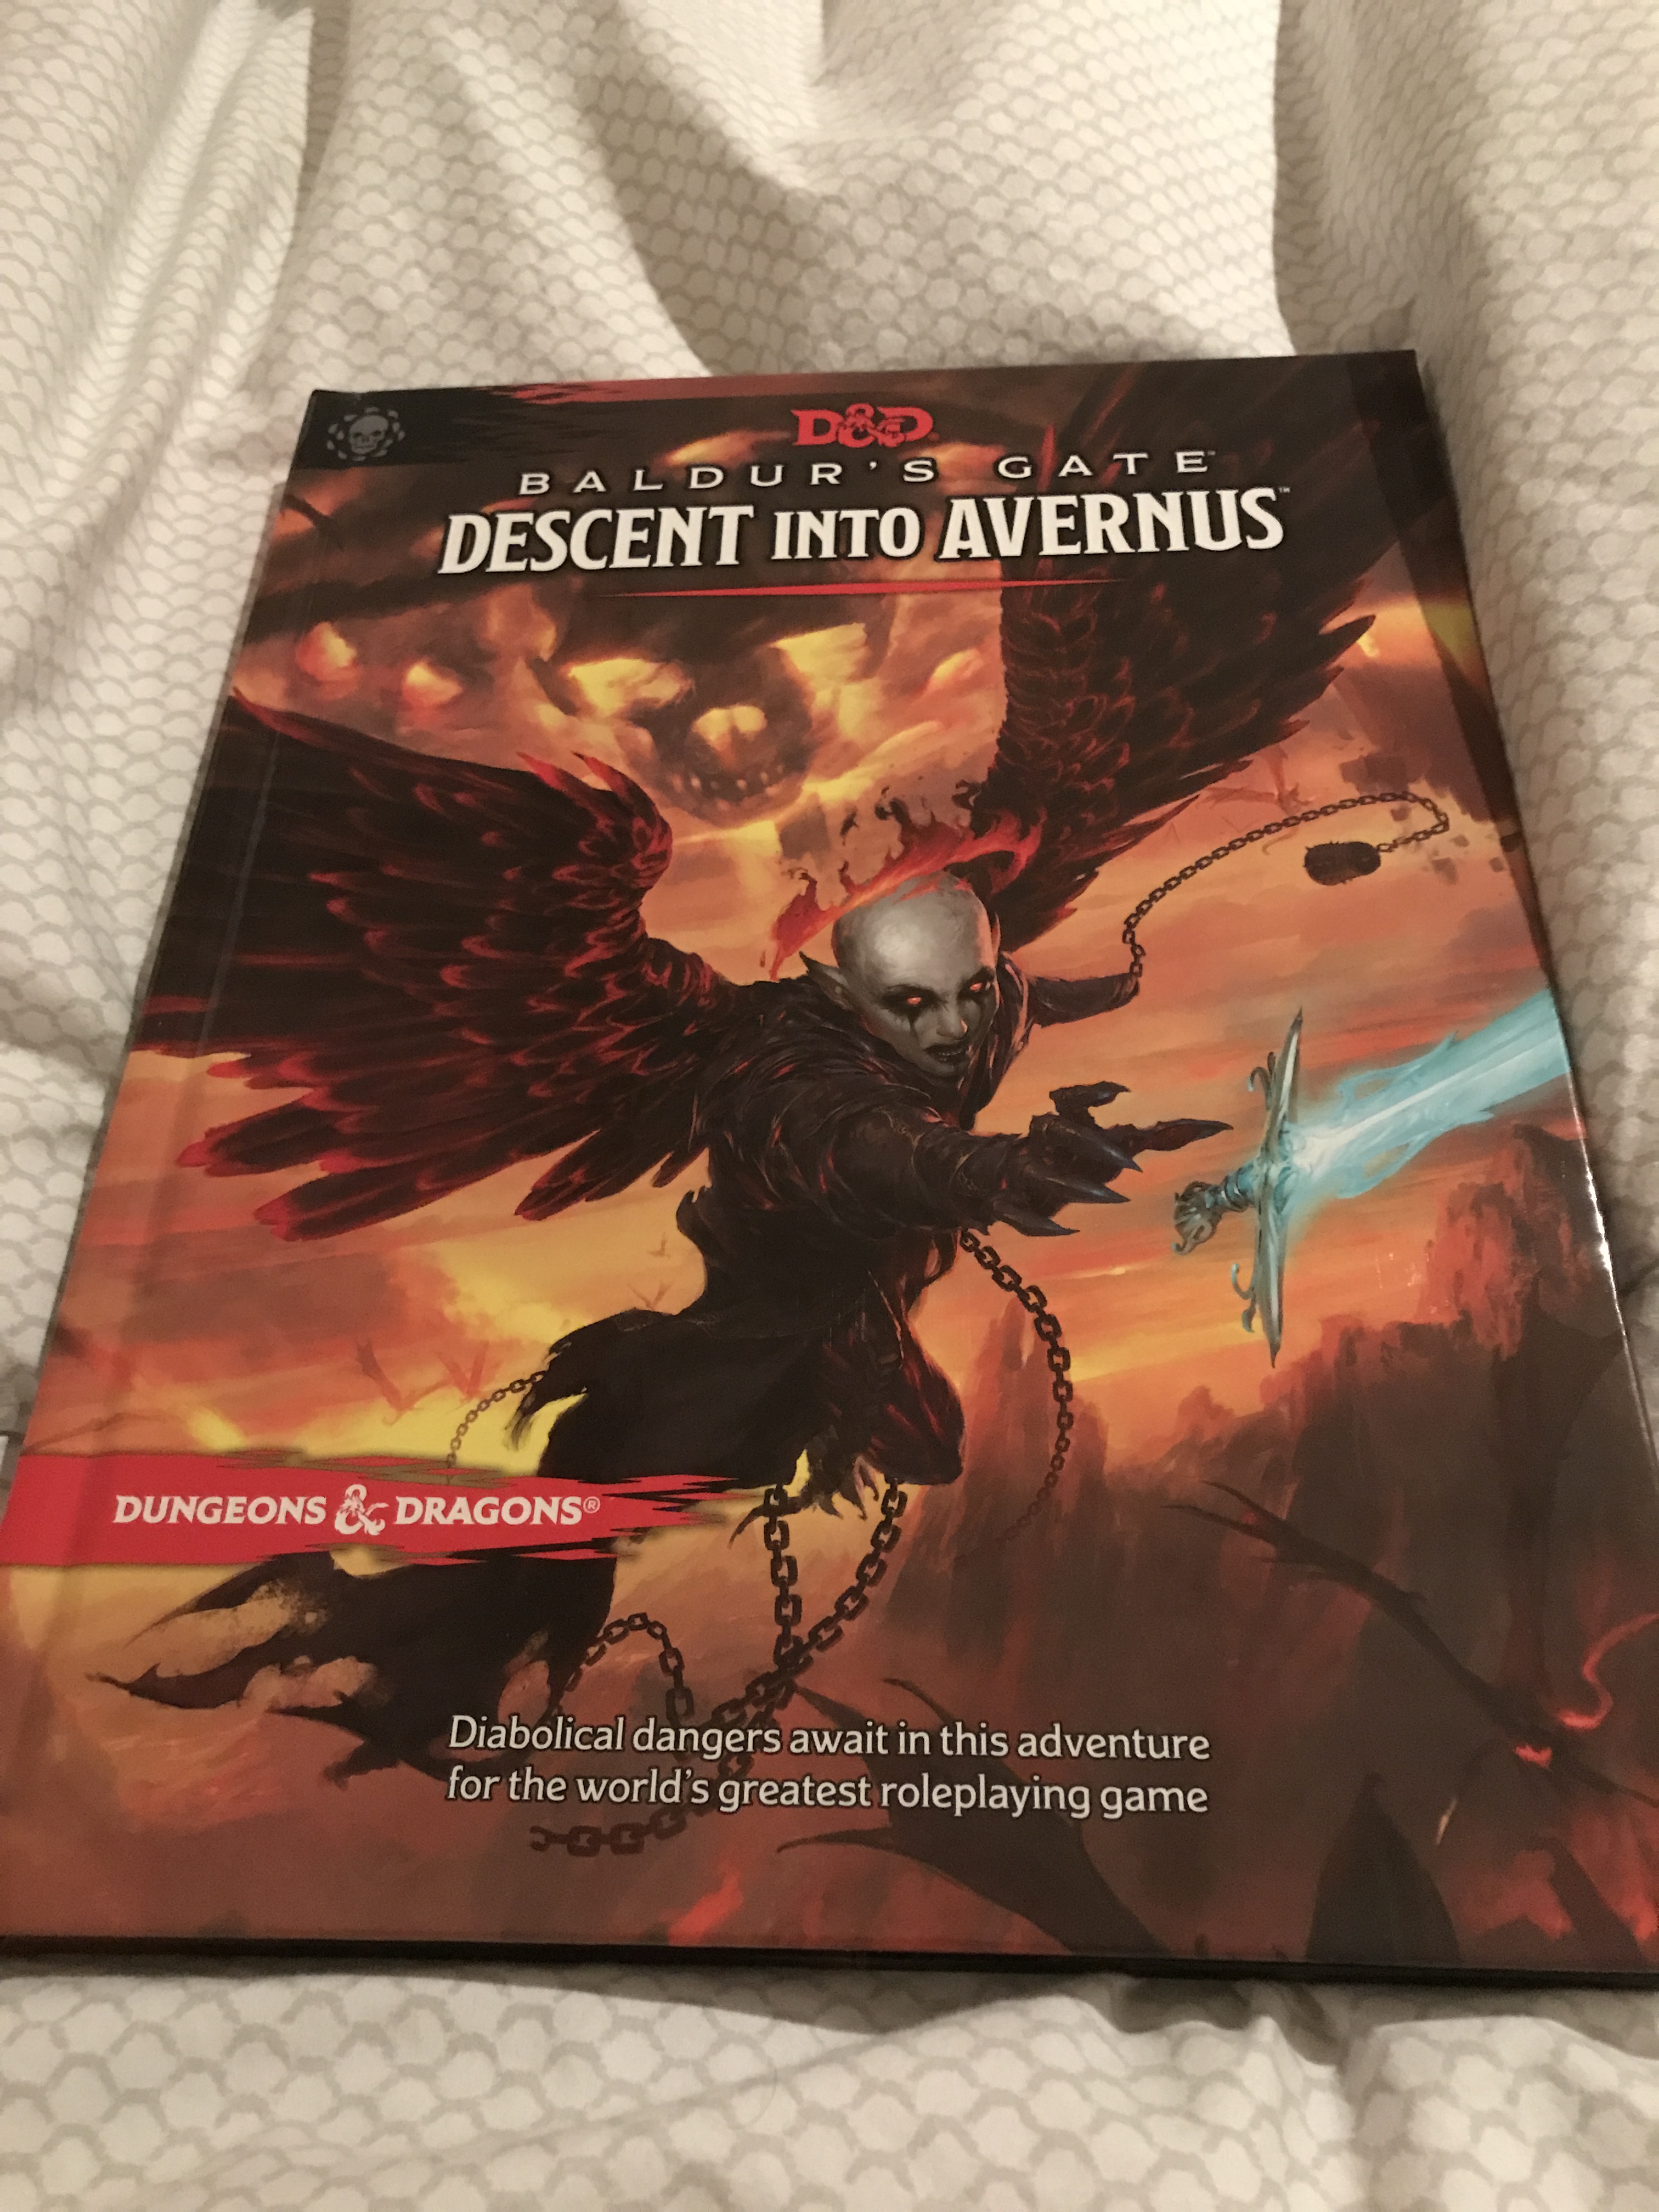 Thoughts on running the beginning of Descent into Avernus